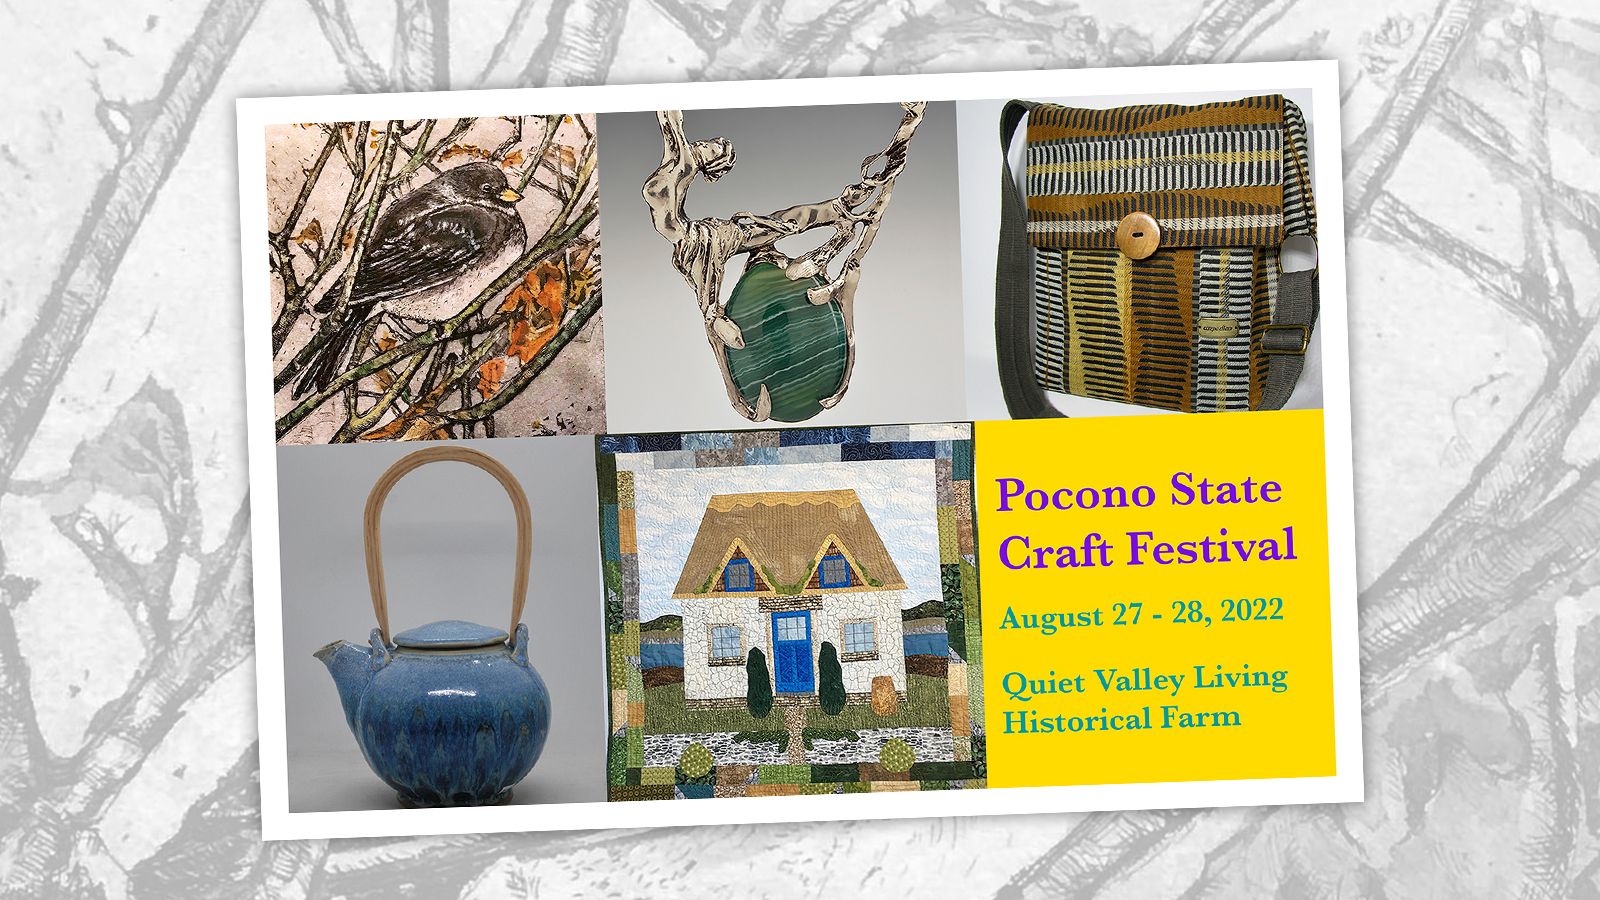 Pocono State Craft Festival / August 27-28 at Quiet Valley Living Historical Farm